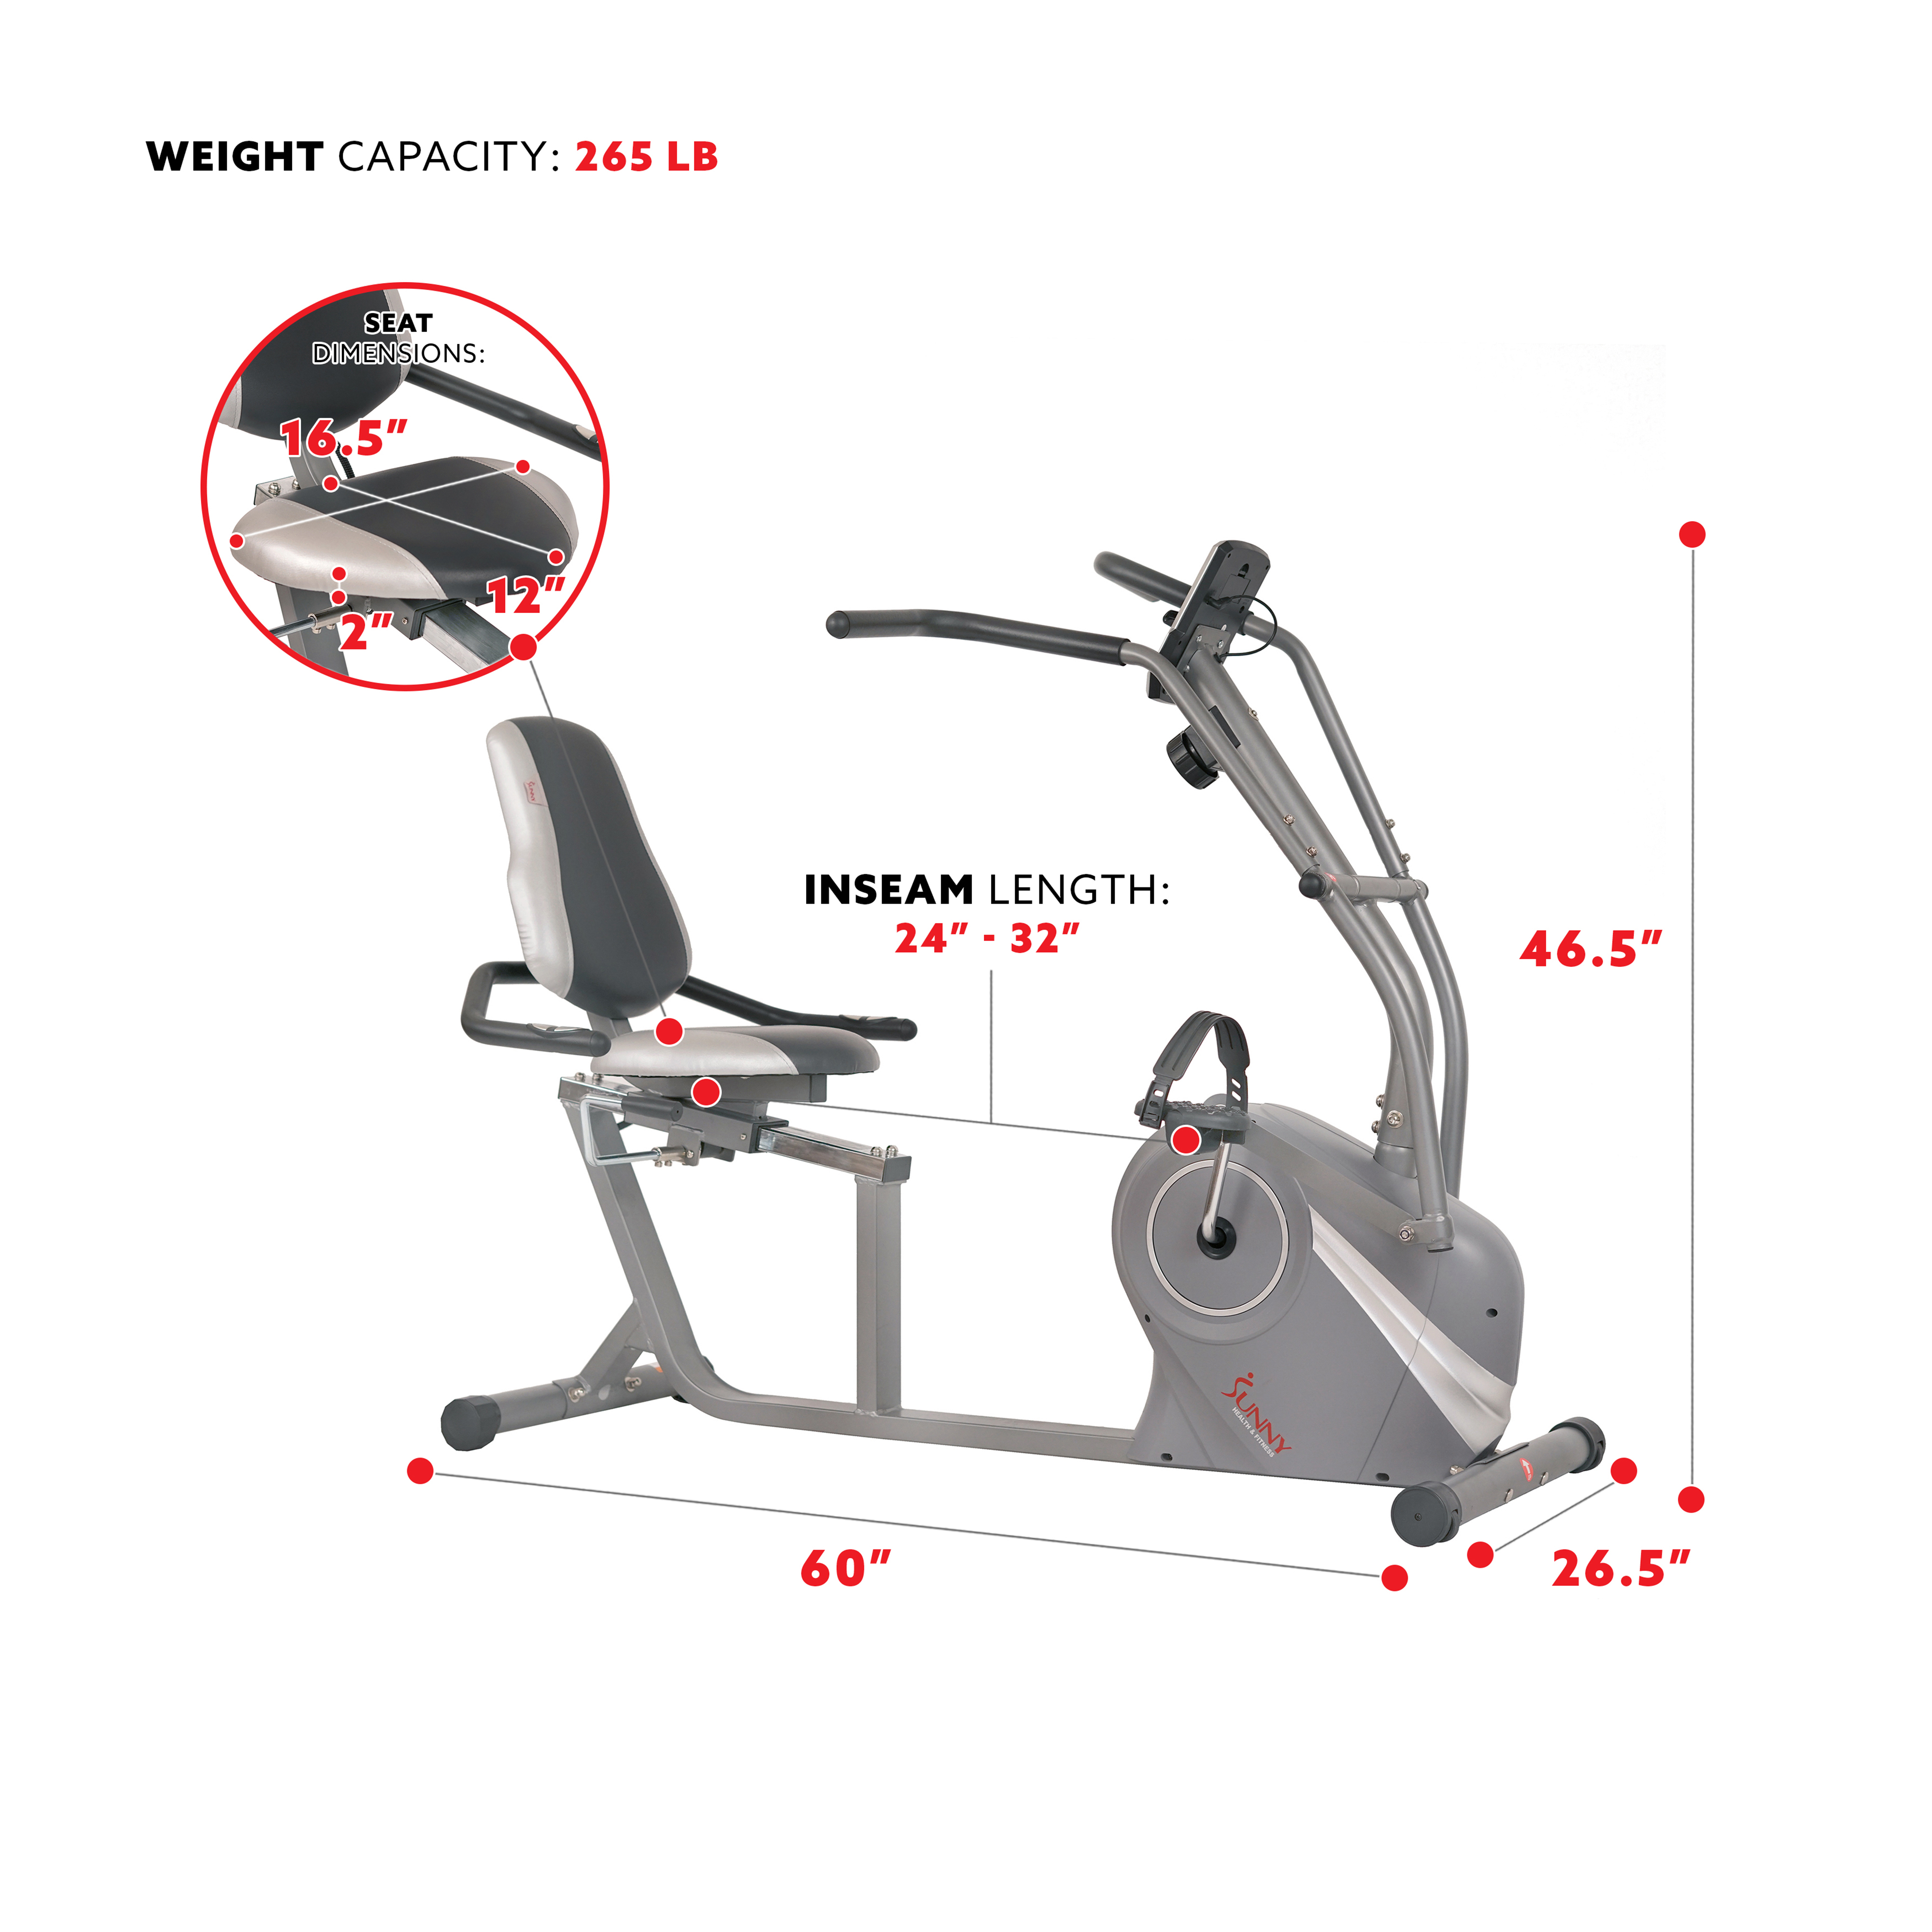 Sunny Health & Fitness Cross Trainer Magnetic Recumbent Bike with Arm Exercisers - SF-RB4936 - image 7 of 11